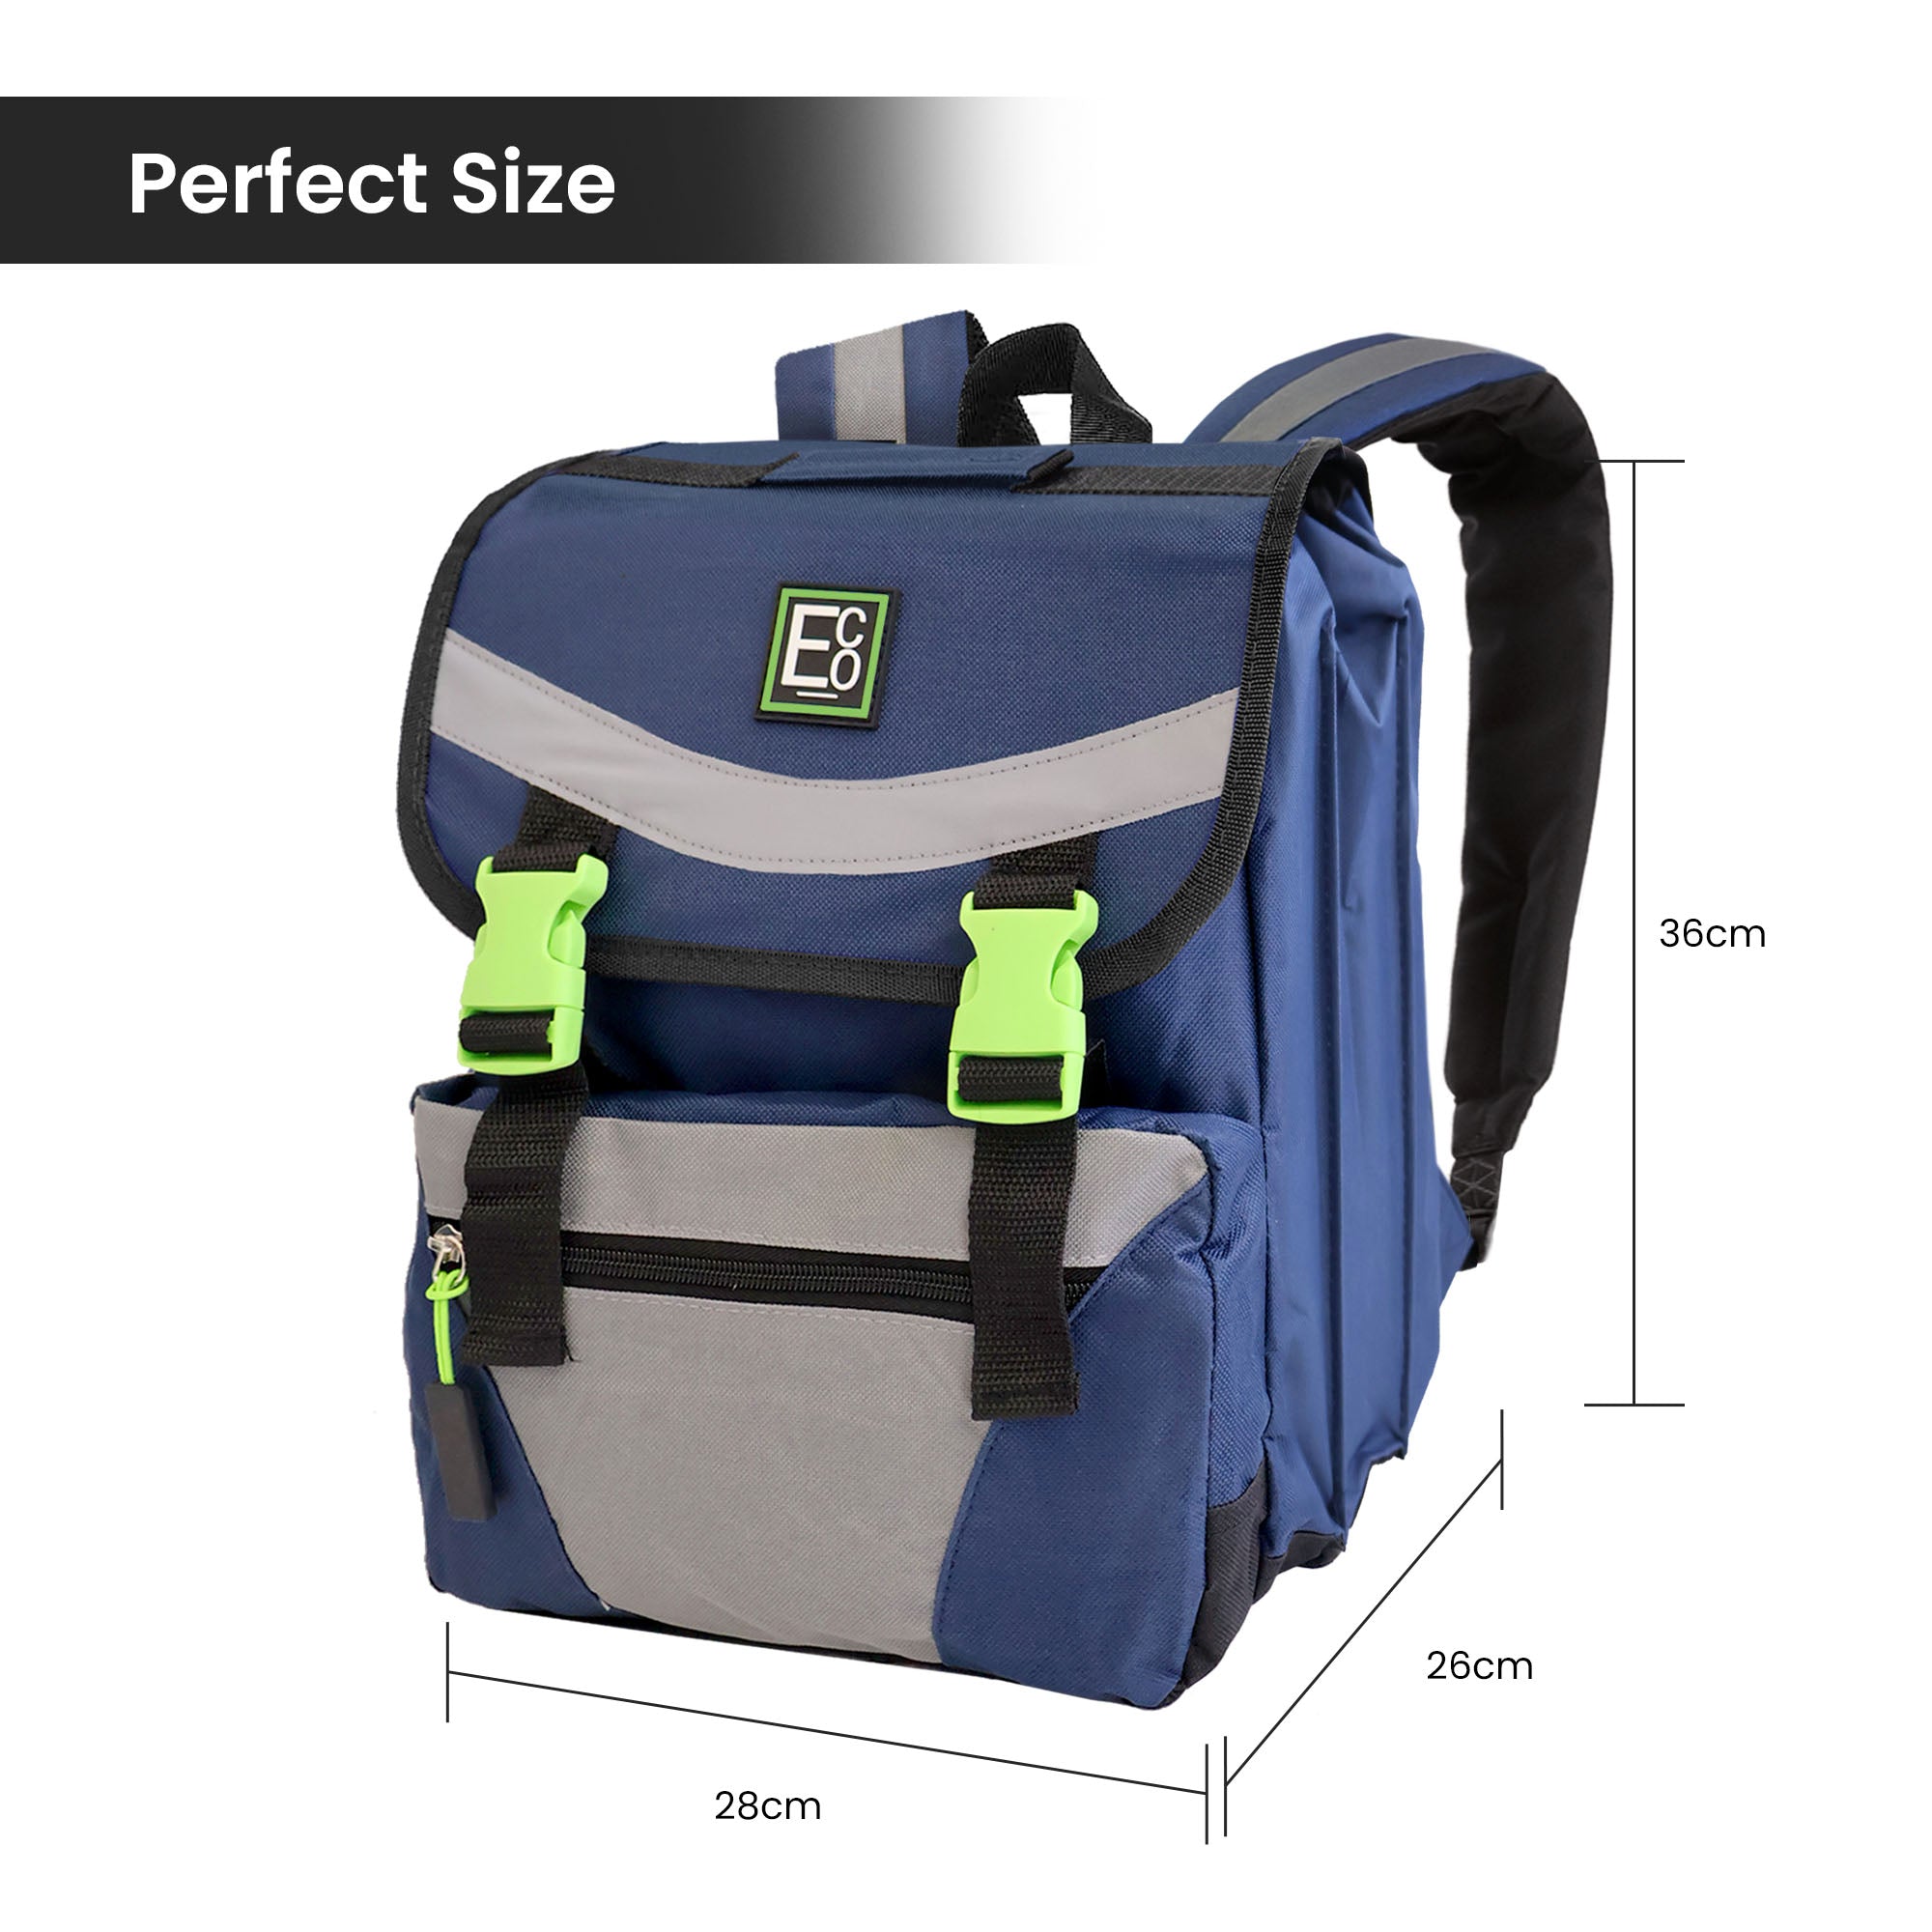 5-Division Back To School Backpack